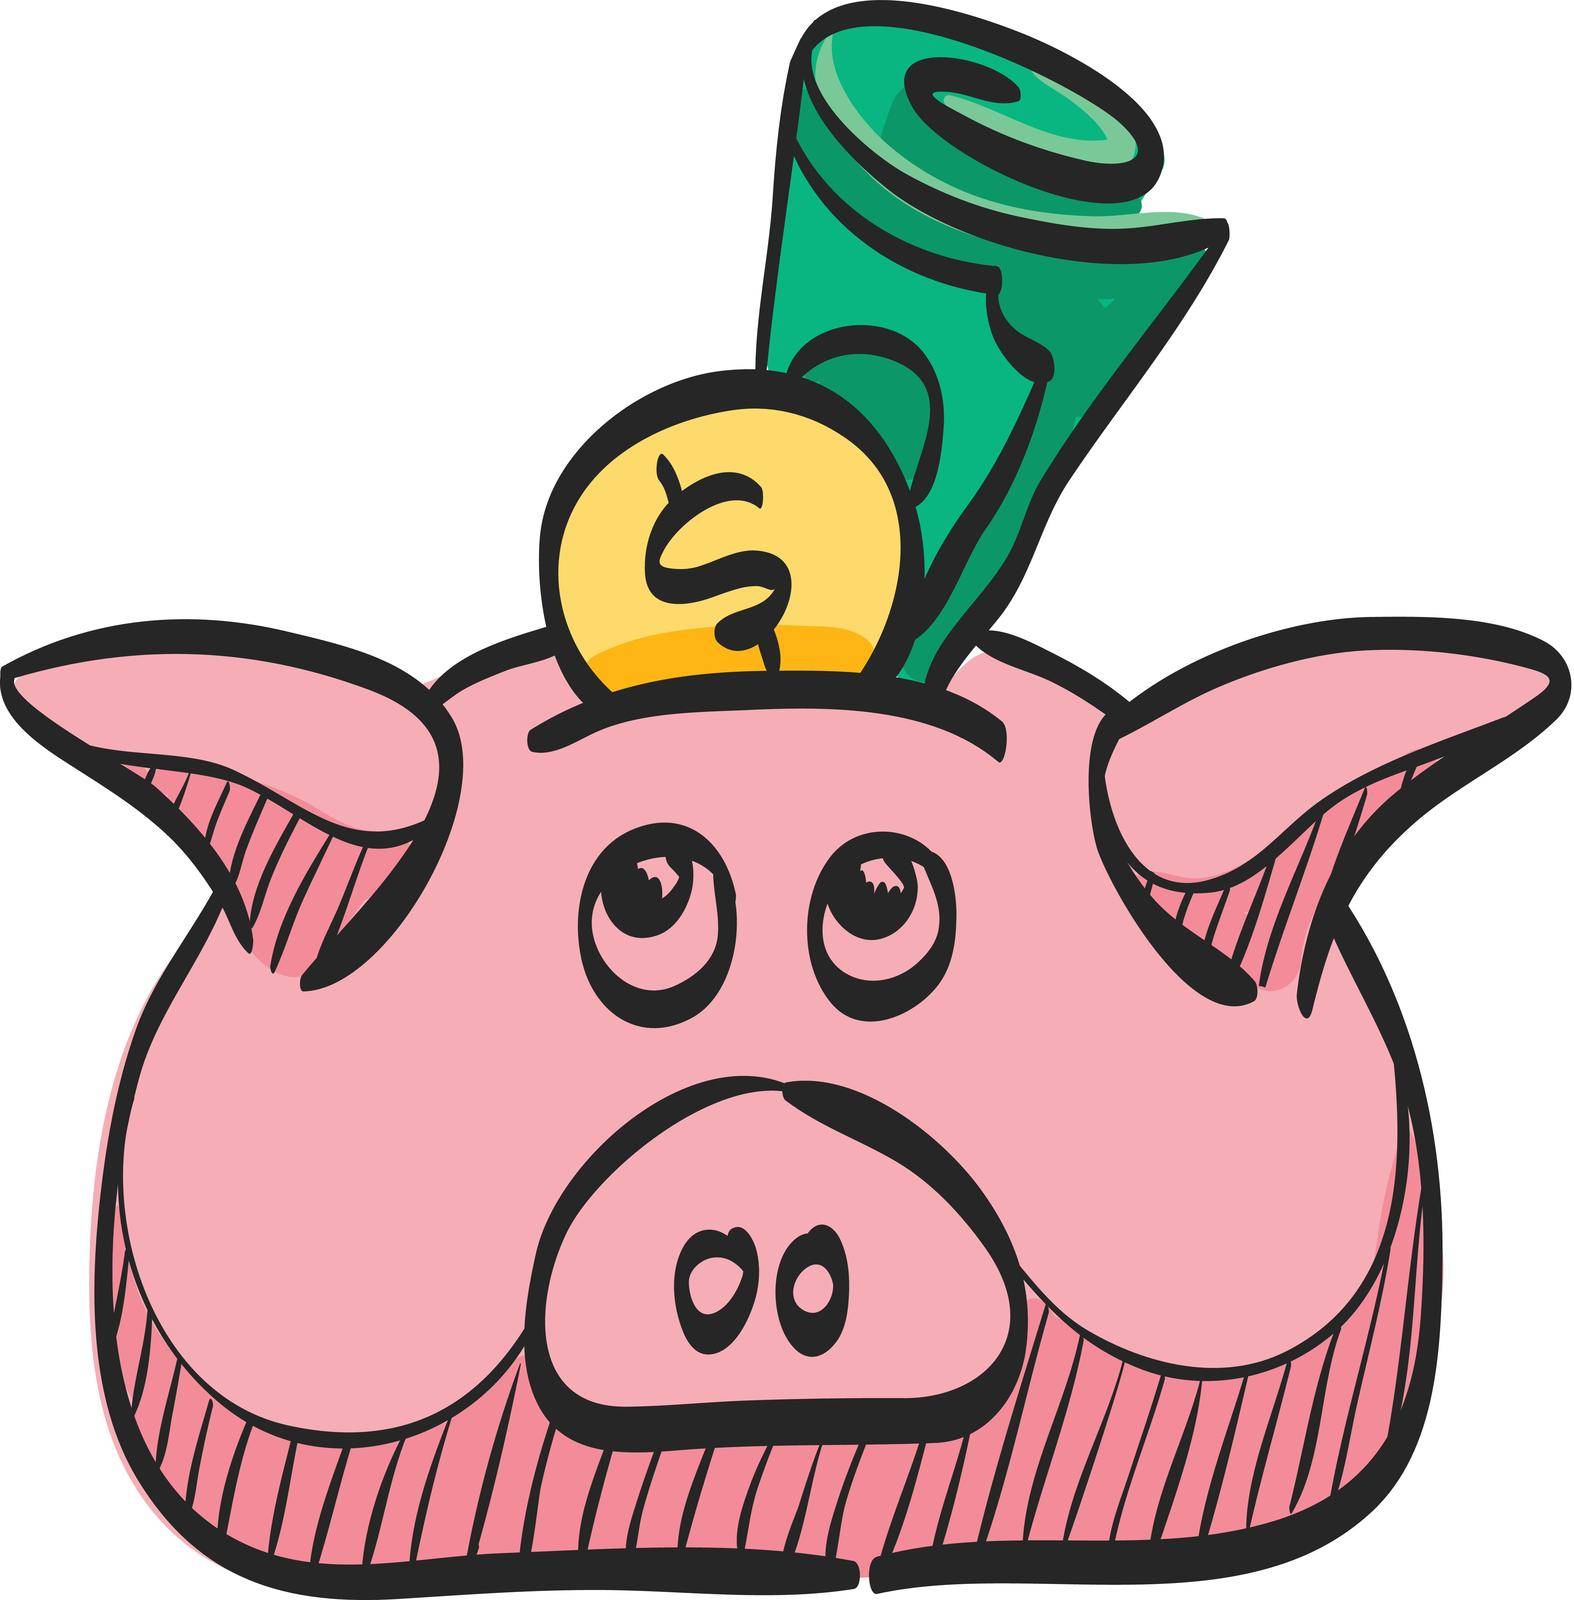 Coin piggy bank icon in color drawing. Saving, kids, bank 